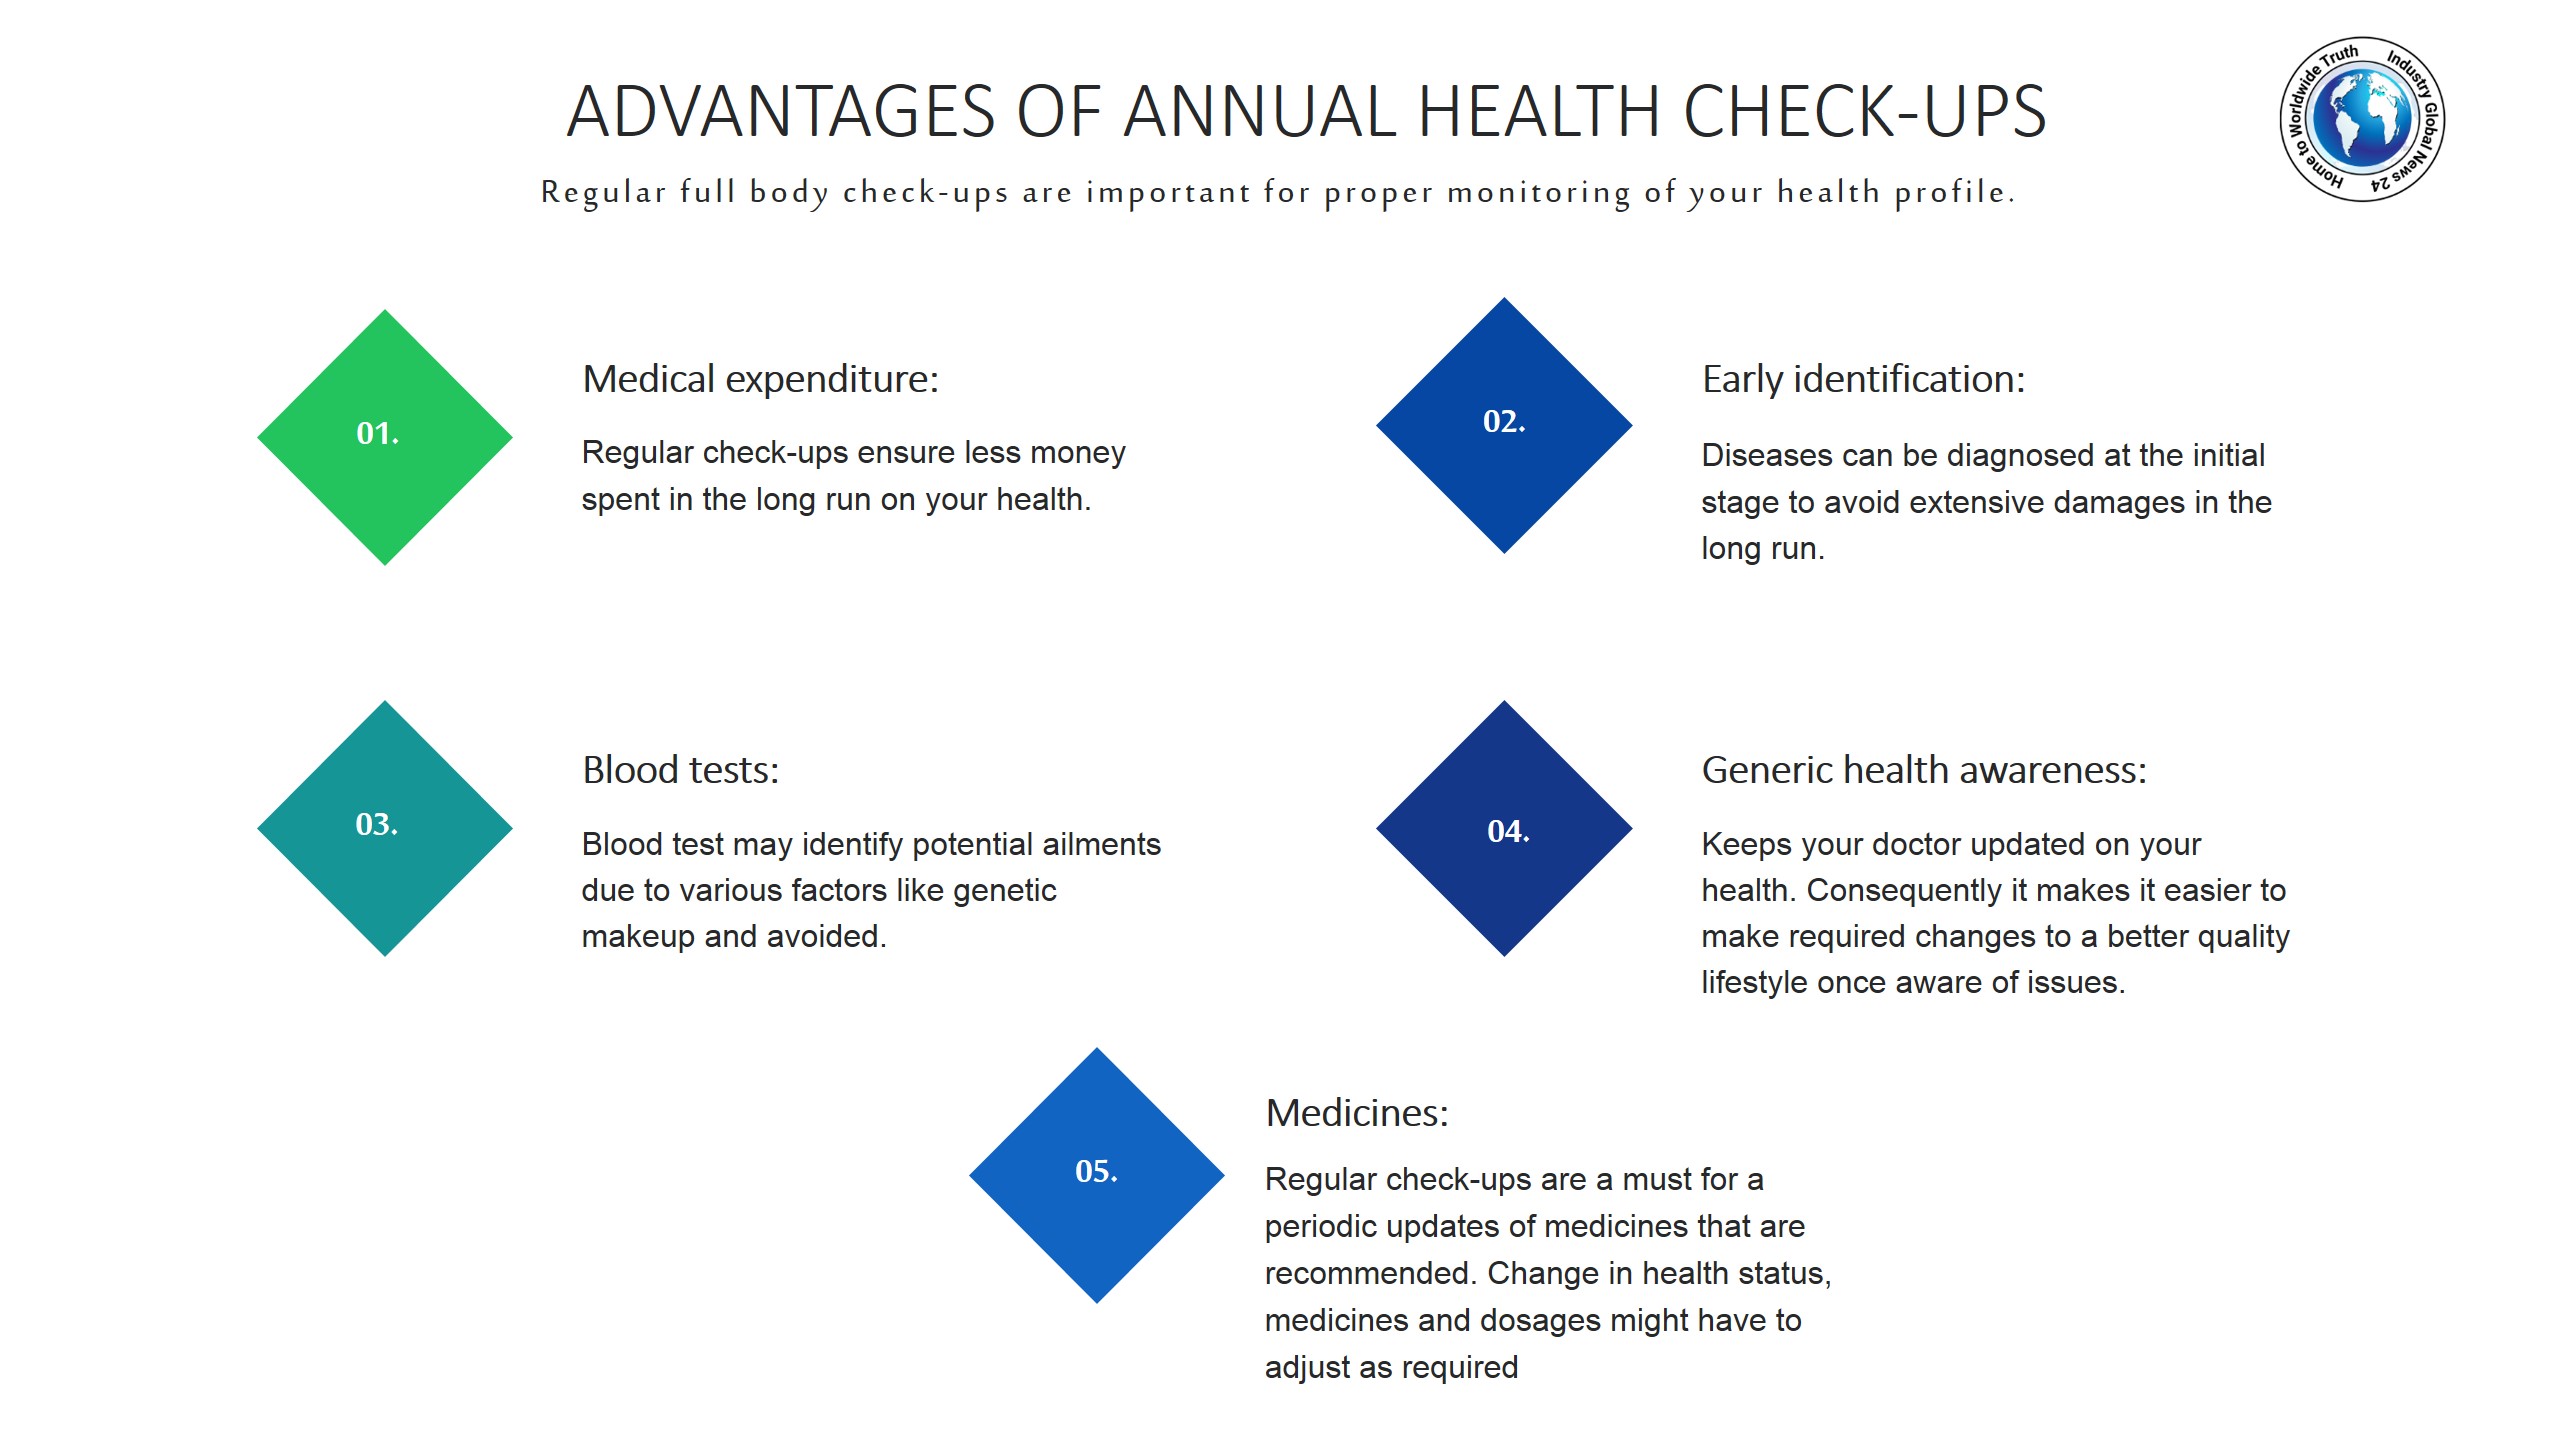 Advantages of annual health checkups